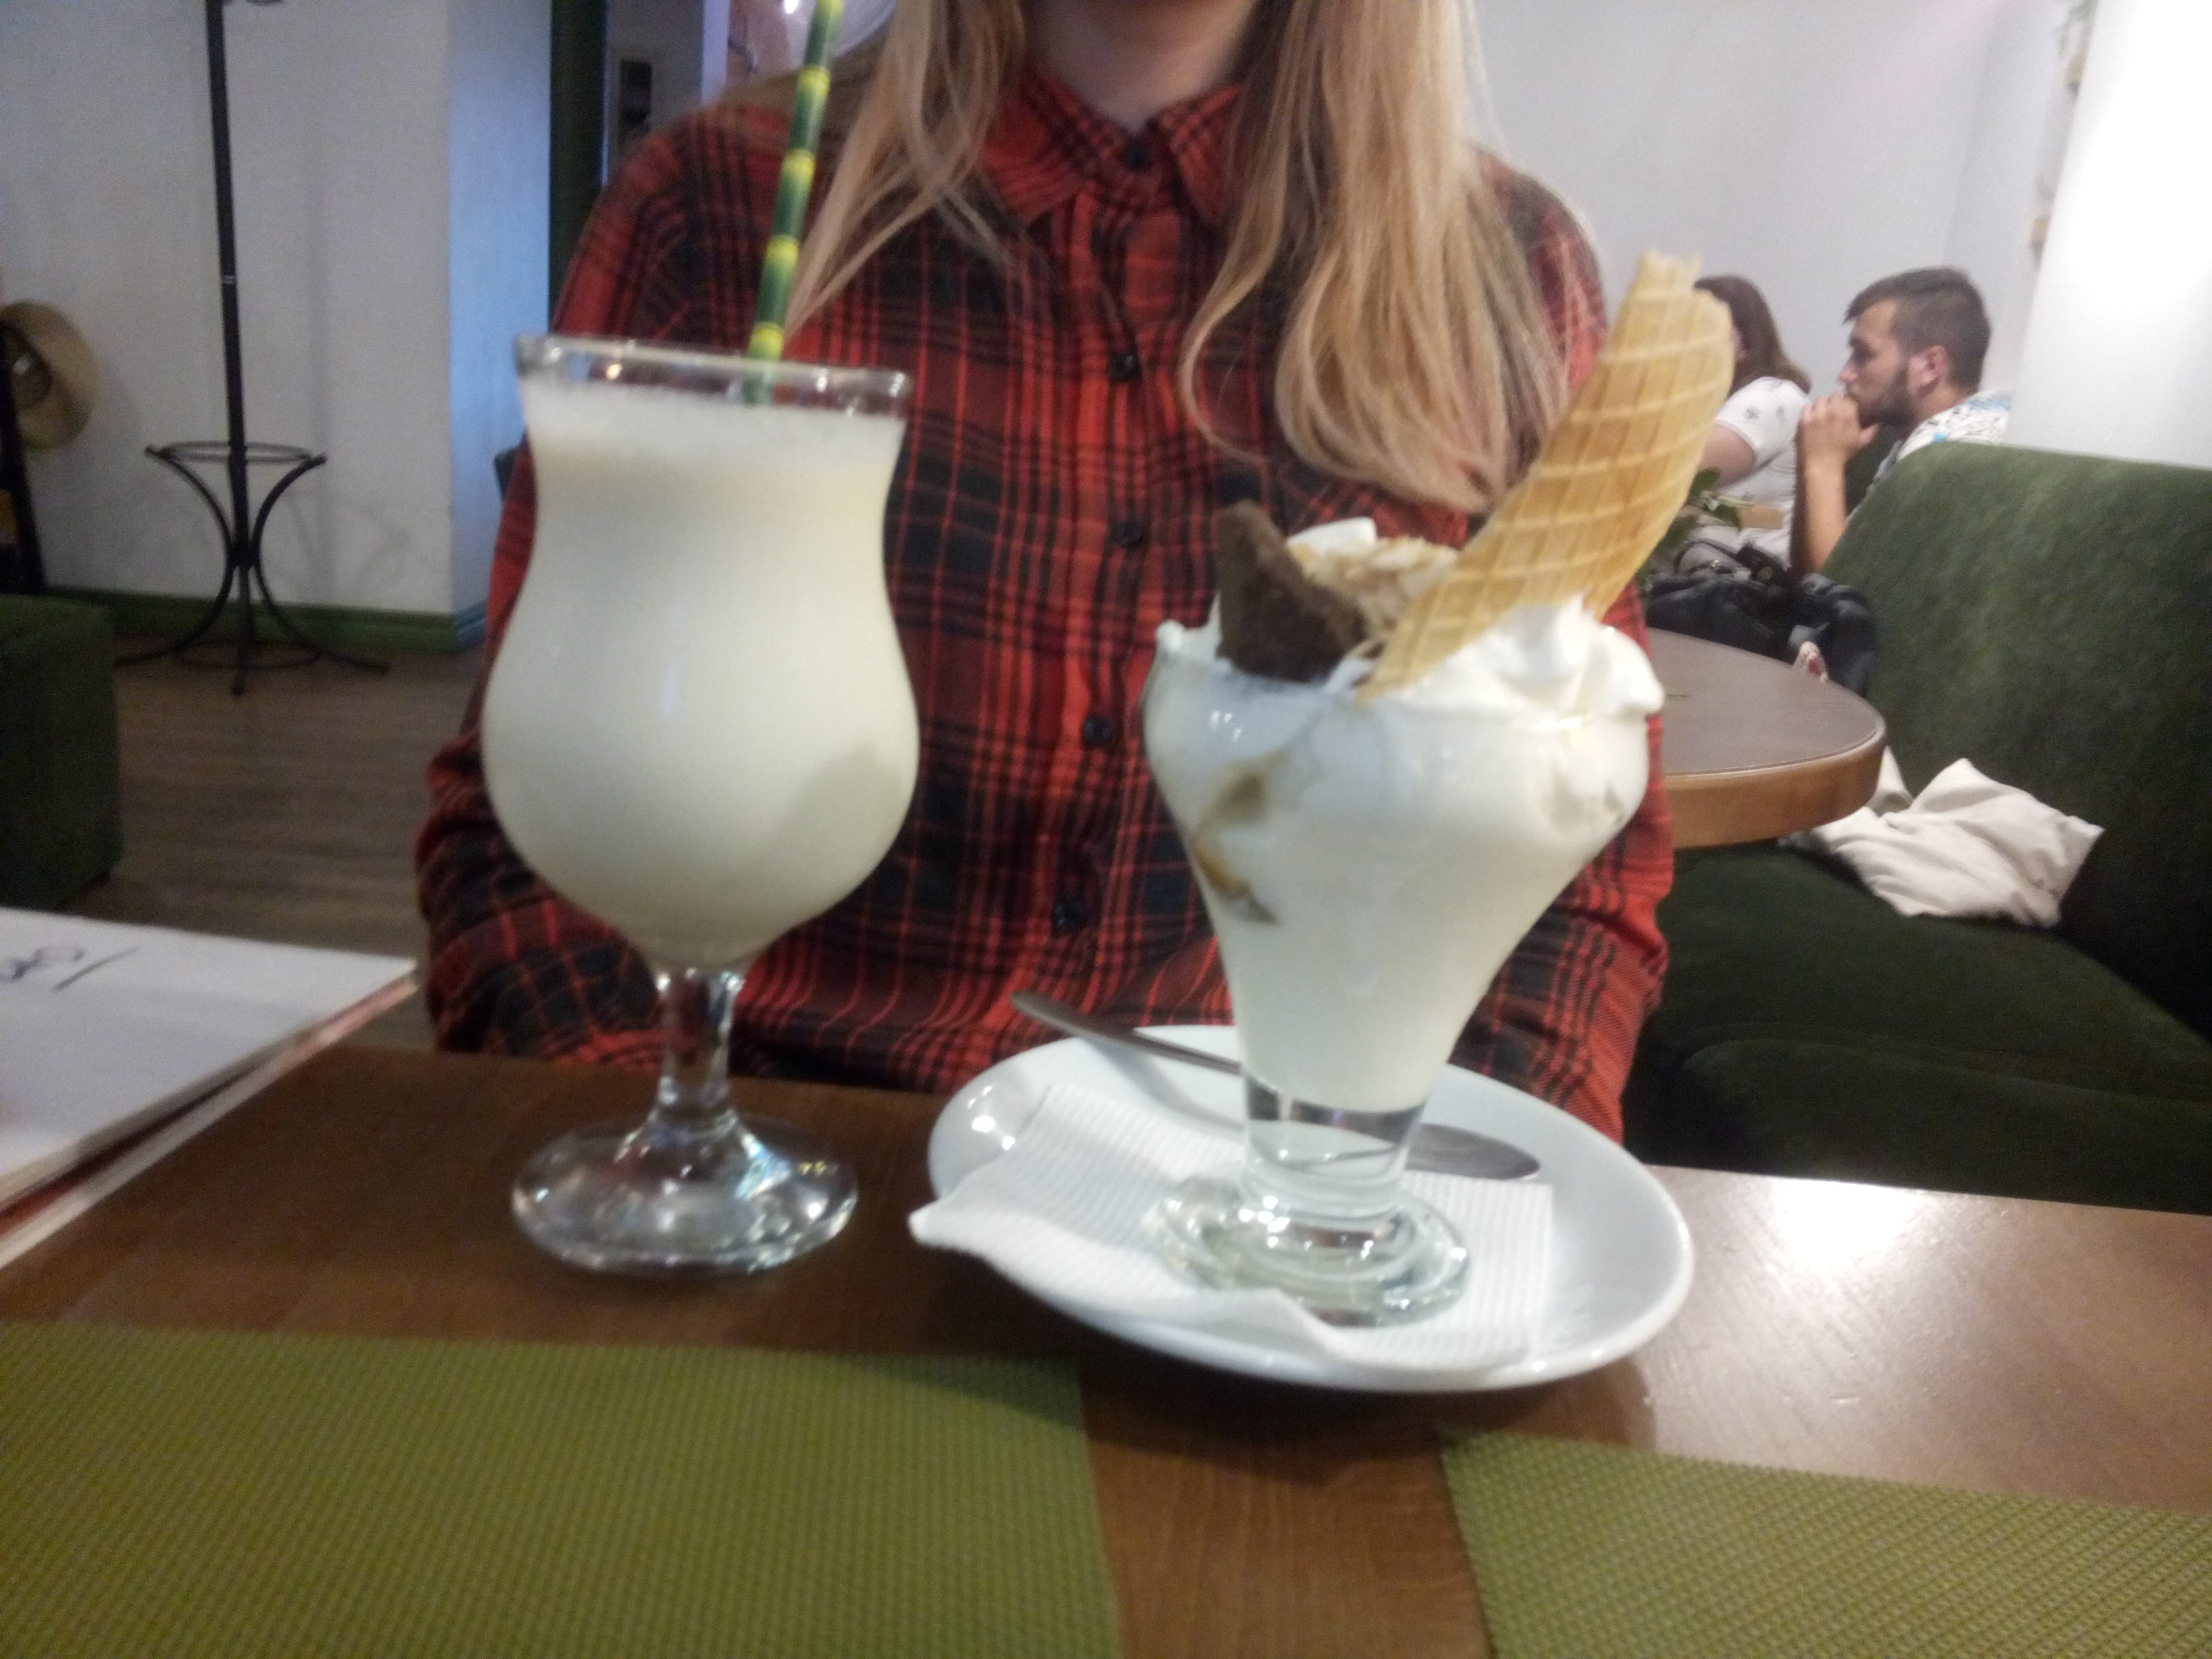 The torso of a woman in a red check shirt is visible behind a large cocktail glass full of something creamy and an icecream sundae with chocolate and wafers